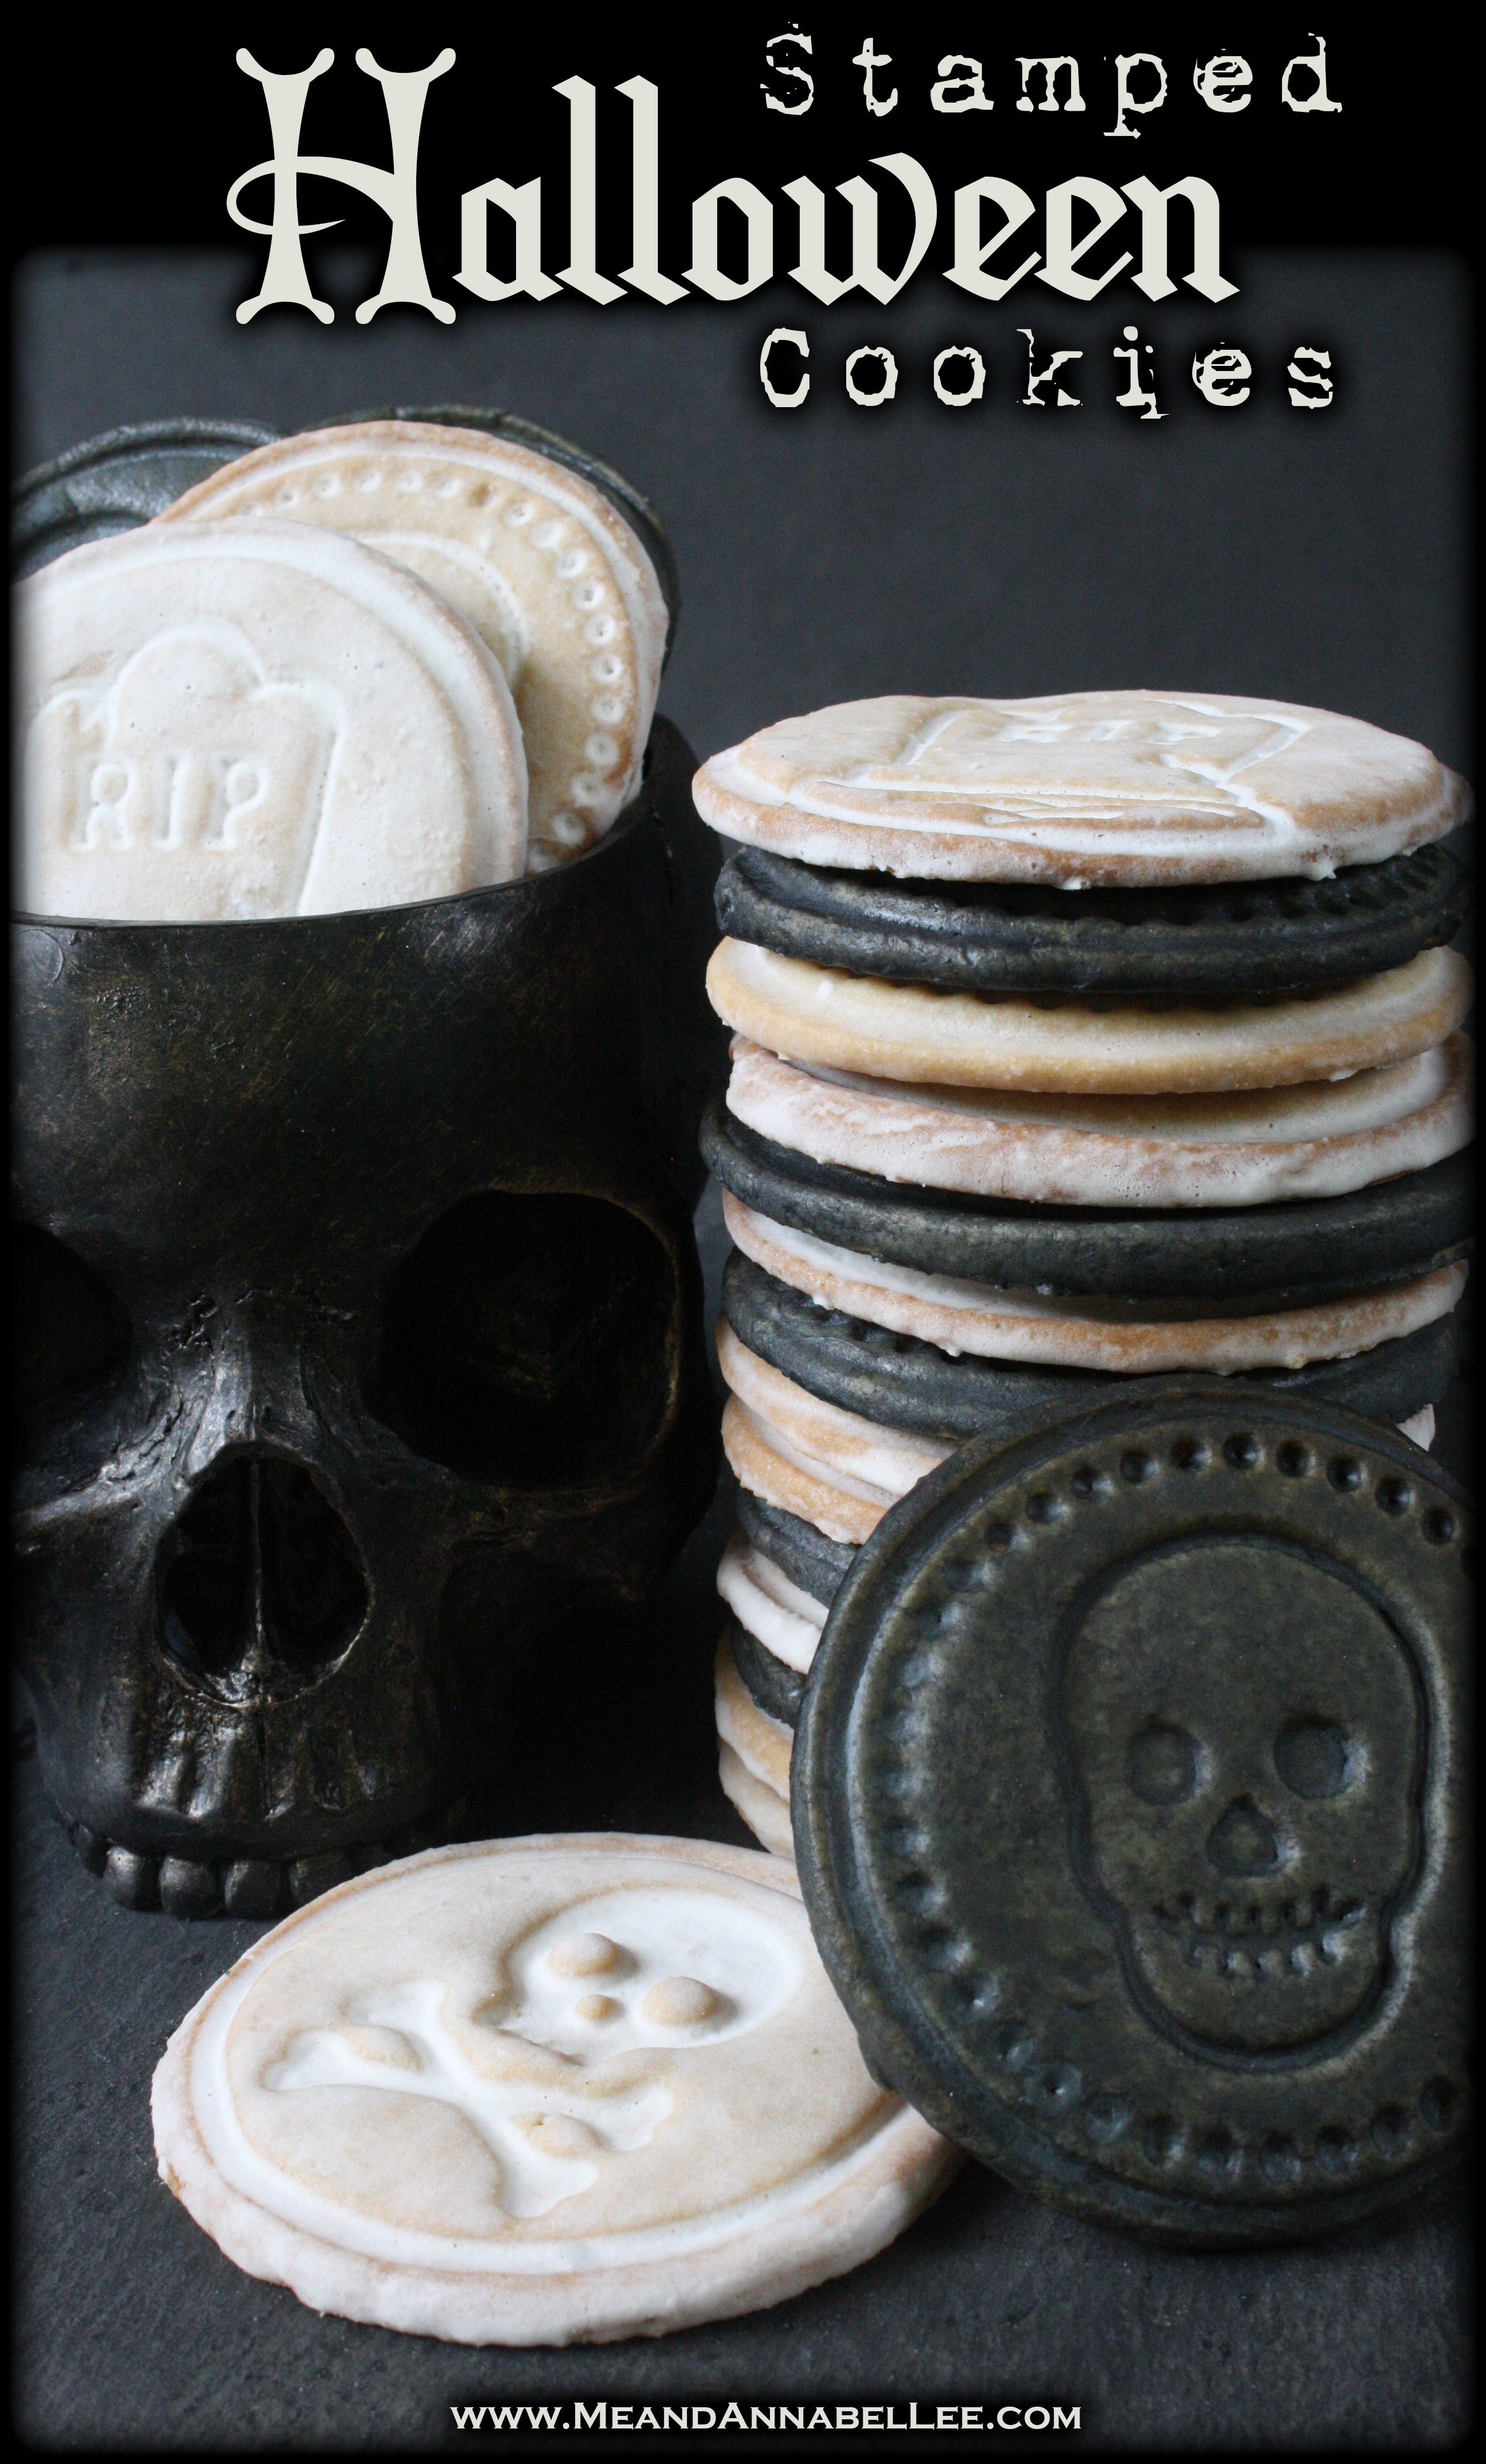 Halloween Cookie Stamps | Skulls and Crossbones and RIP Tombstones| Gothic Treats | Almond Vanilla Sugar Cookie Recipe | Black and White Iced Cookies | Royal Flood Icing | www.MeandAnnabelLee.com